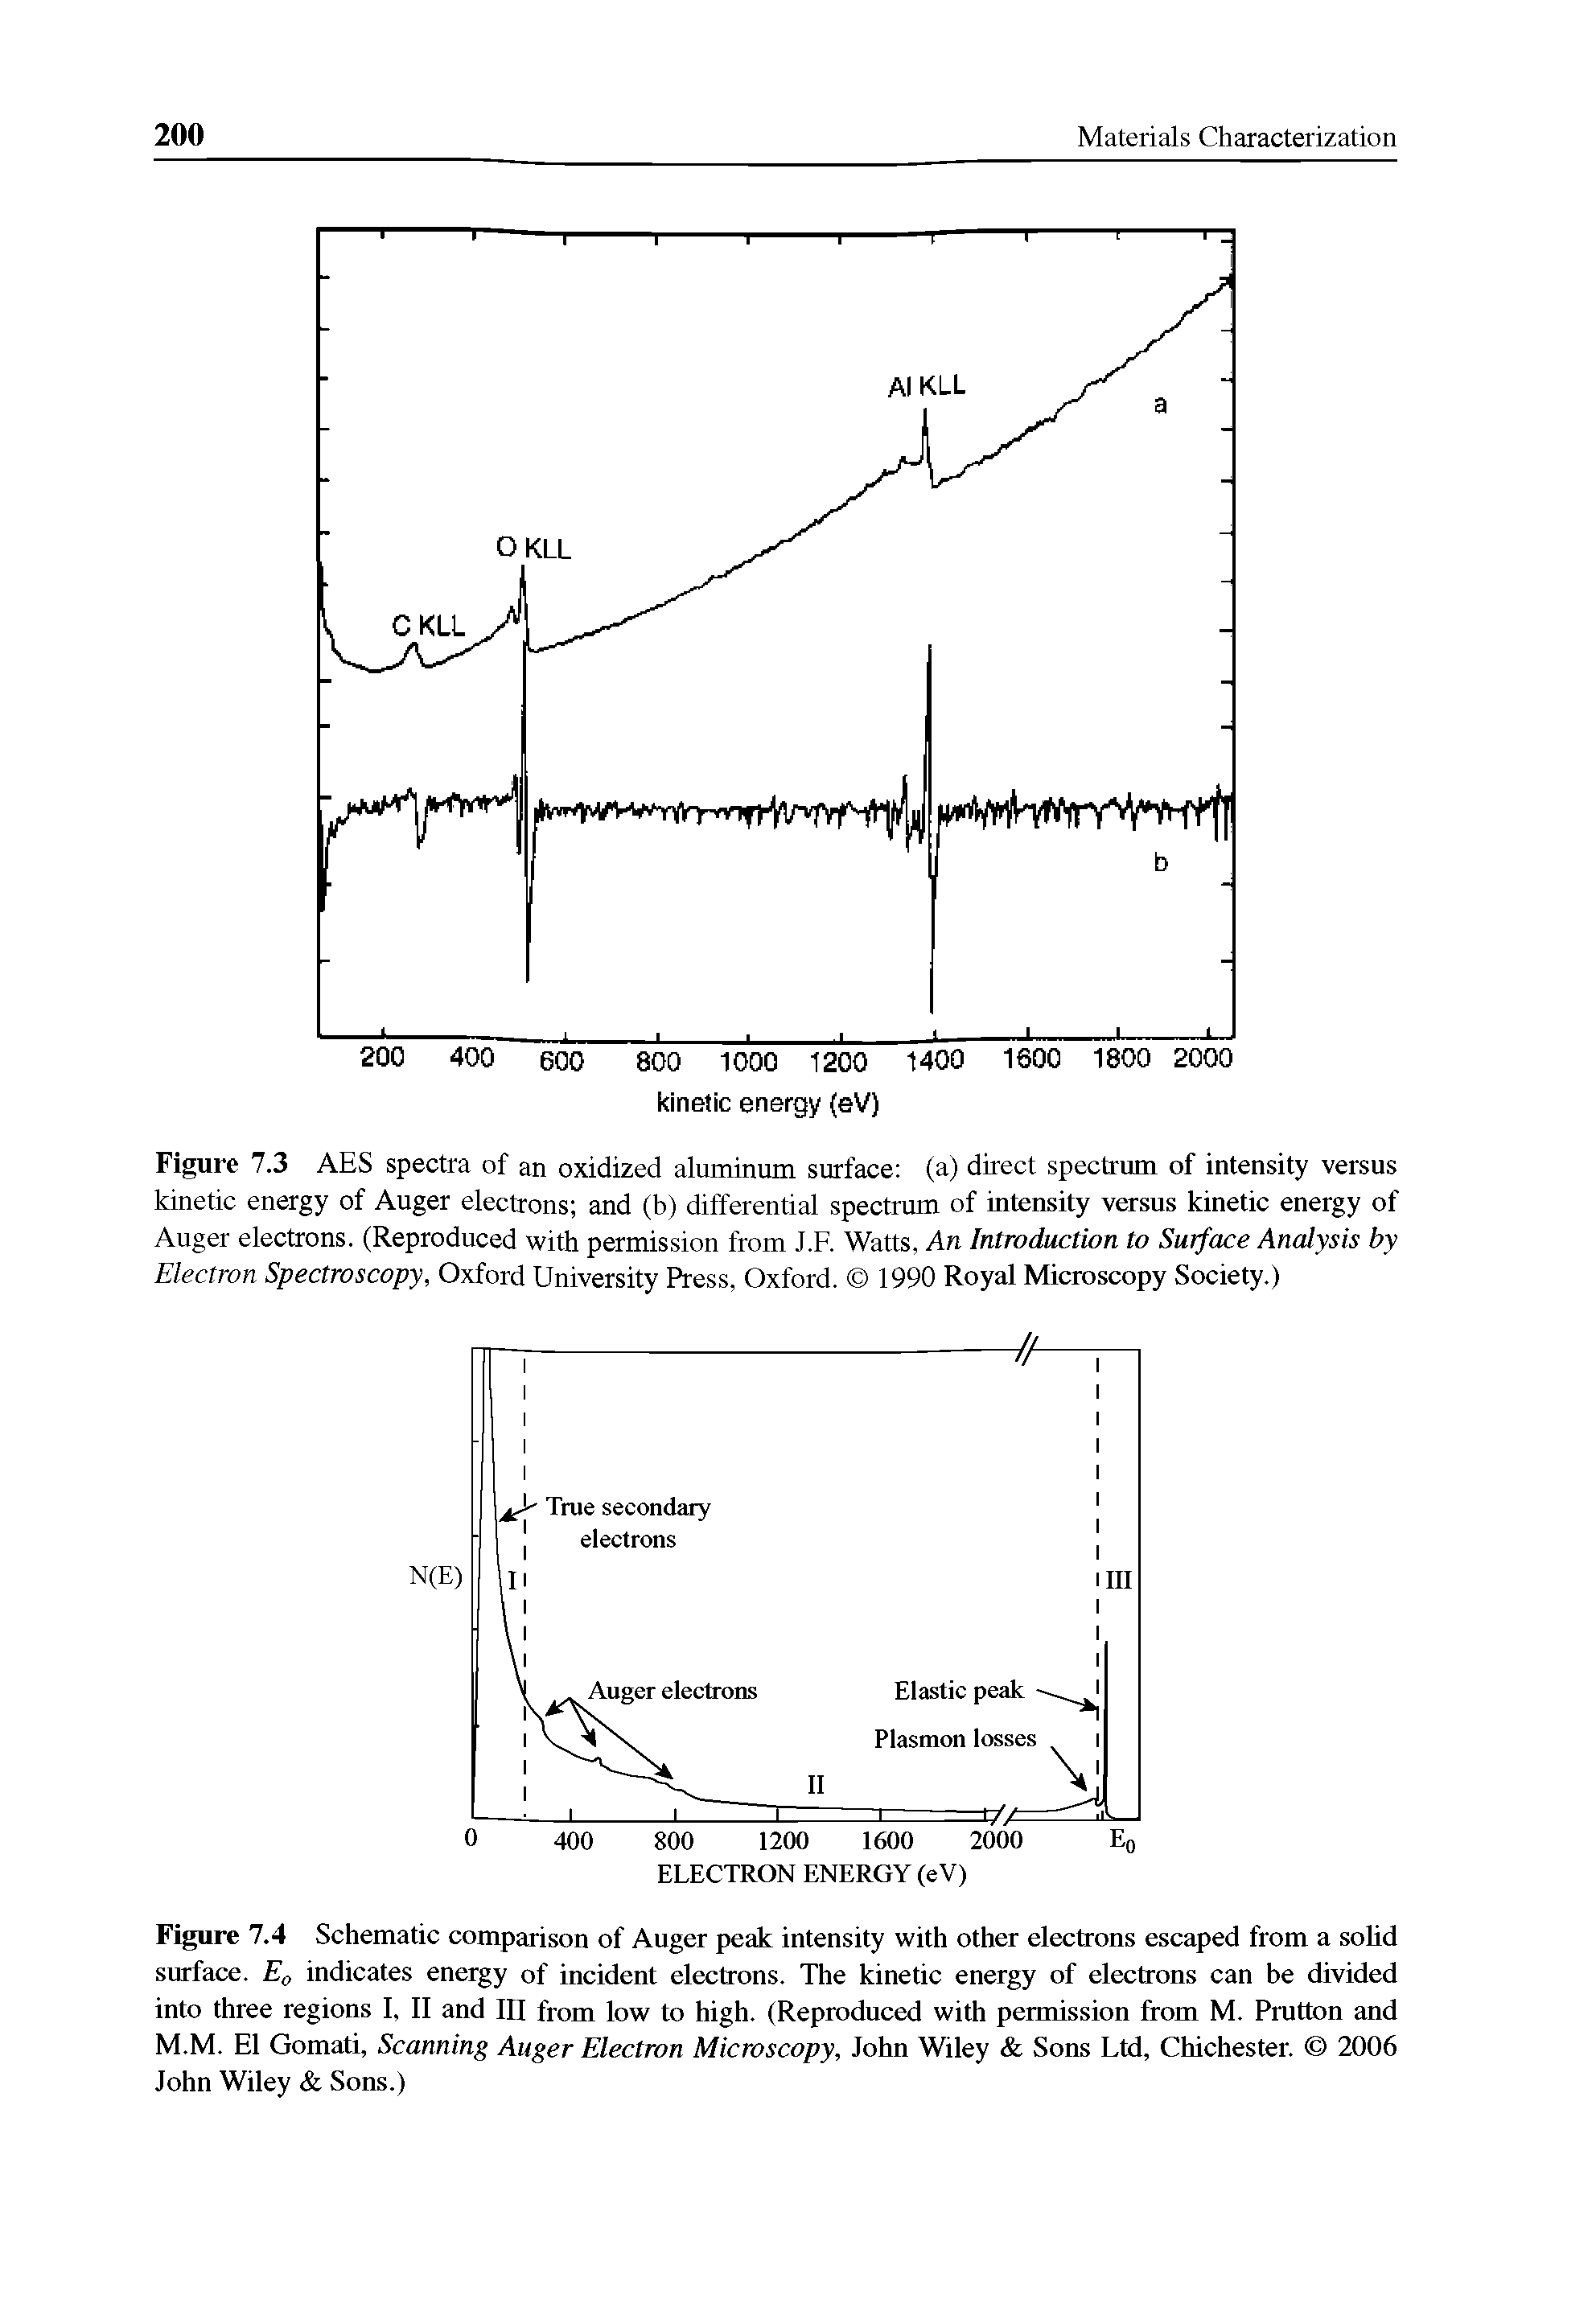 Figure 7.3 AES spectra of an oxidized aluminum surface (a) direct spectrum of intensity versus kinetic energy of Auger electrons and (b) differential spectrum of intensity versus kinetic energy of Auger electrons. (Reproduced with permission from J.F. Watts, An Introduction to Surface Analysis by Electron Spectroscopy, Oxford University Press, Oxford. 1990 Royal Microscopy Society.)...